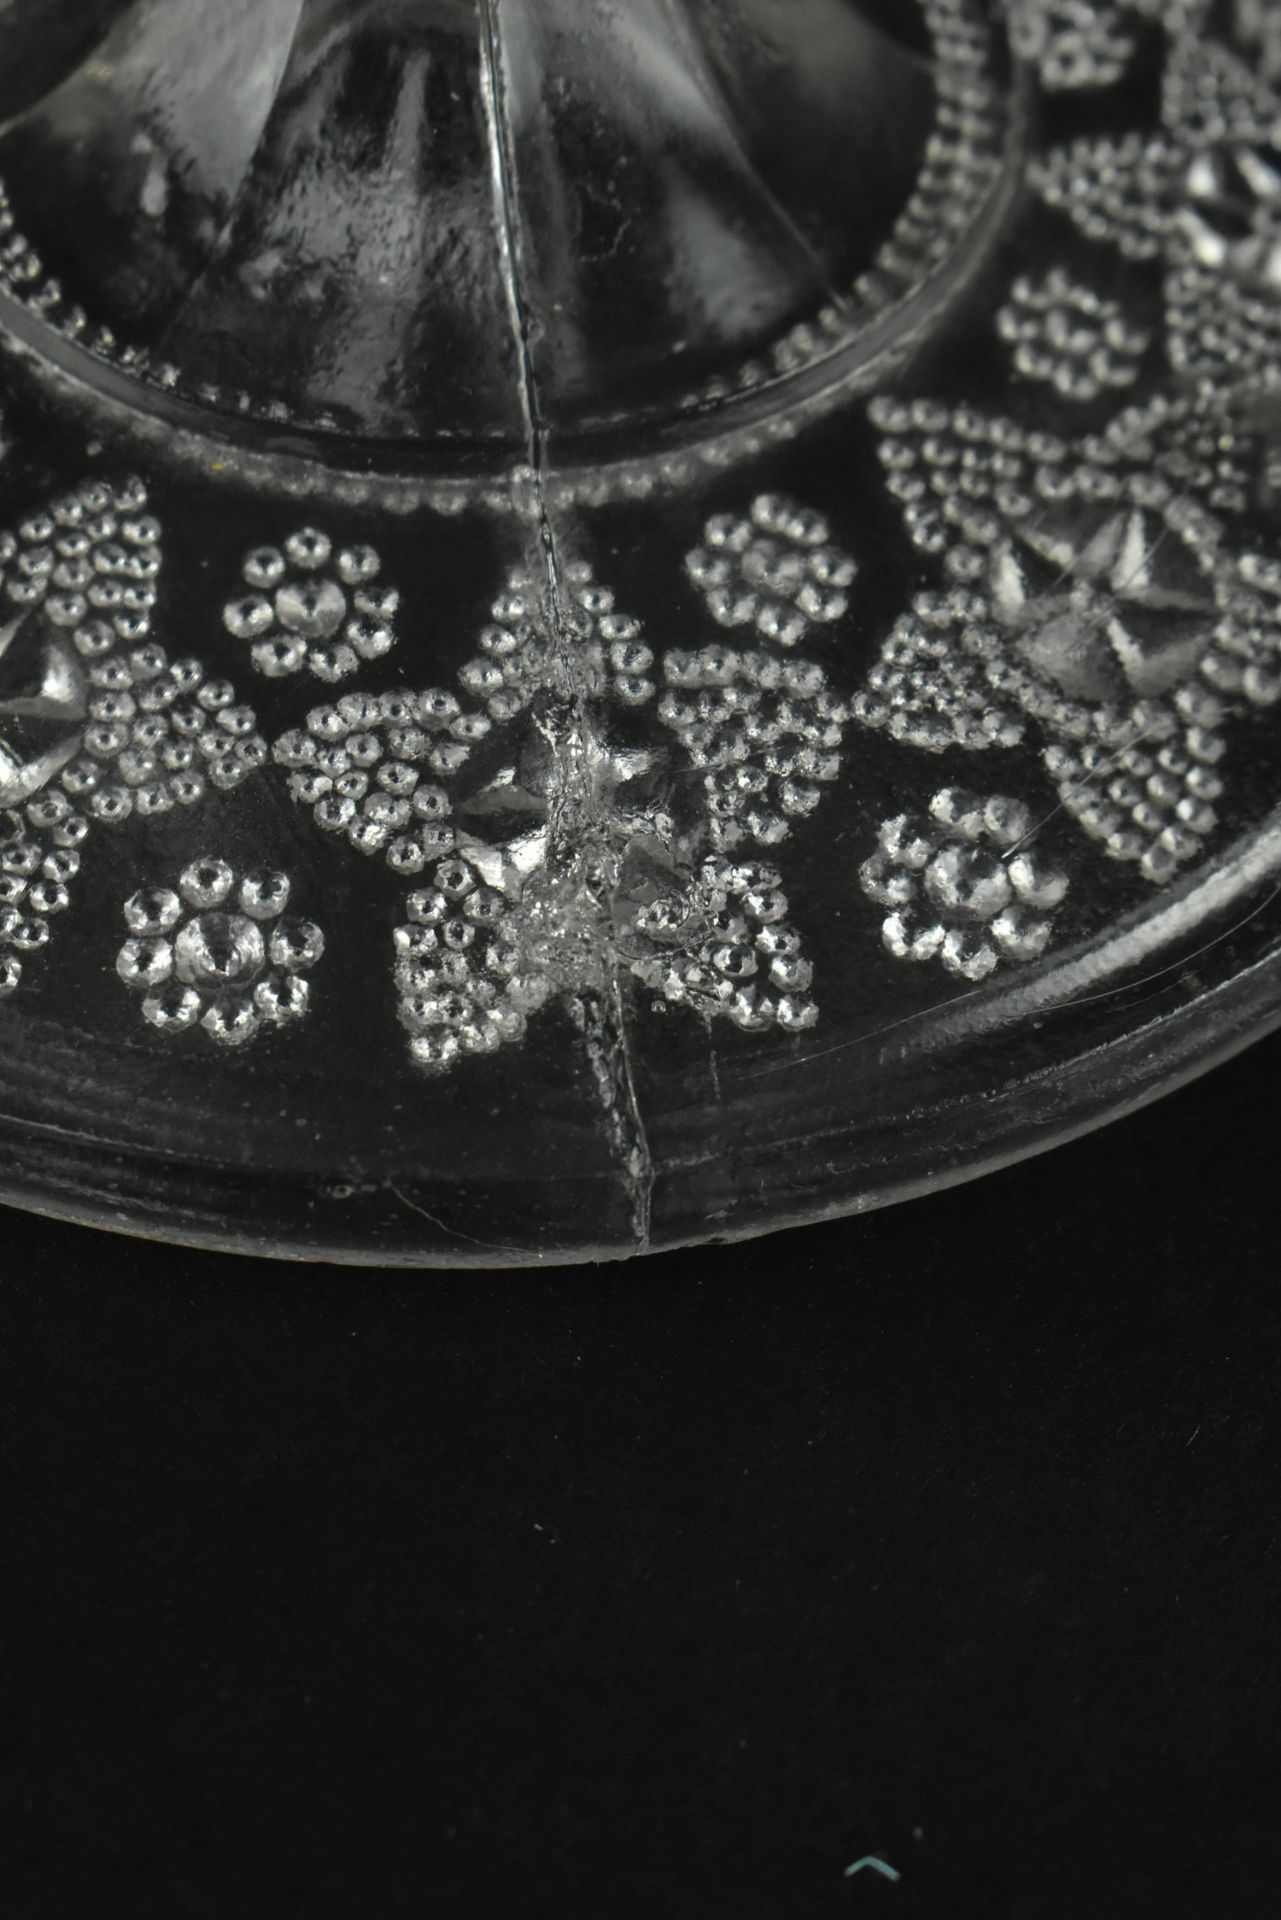 SEVEN 19TH CENTURY HAND MADE GLASSWARE ITEMS - Image 11 of 15